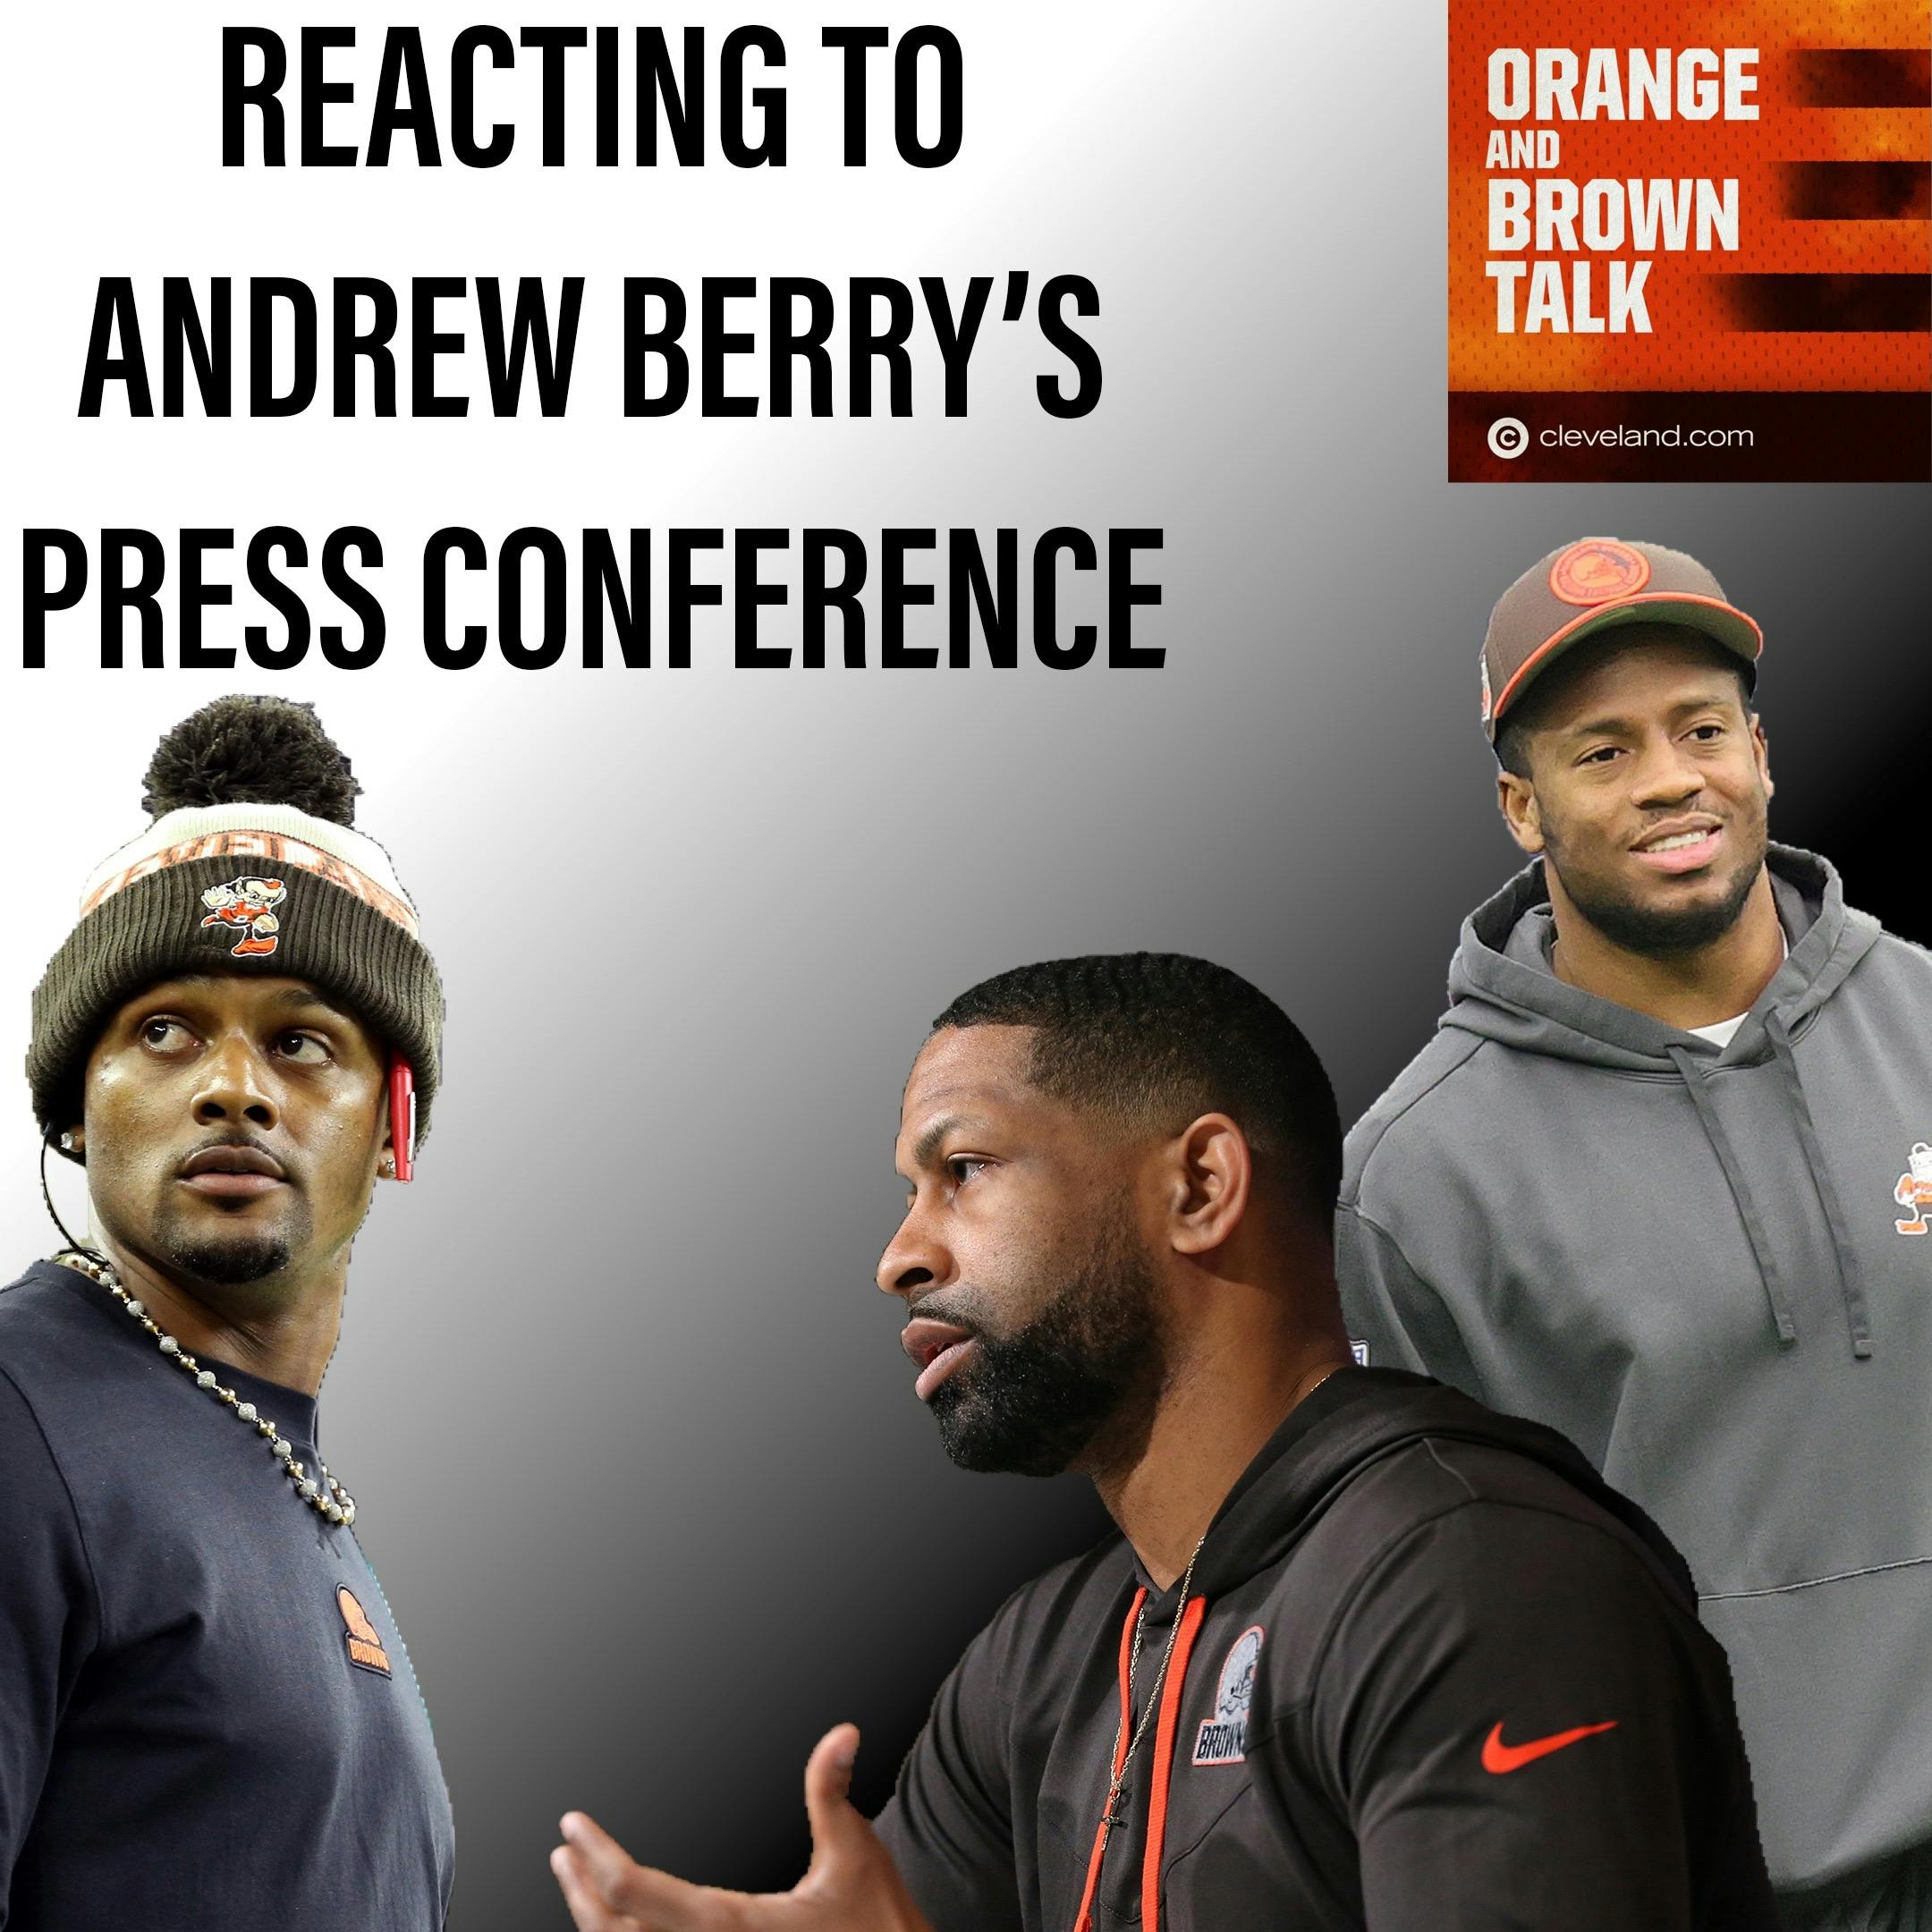 Deshaun Watson and Joe Flacco can coexist on the Browns and more reaction to Andrew Berry's press conference